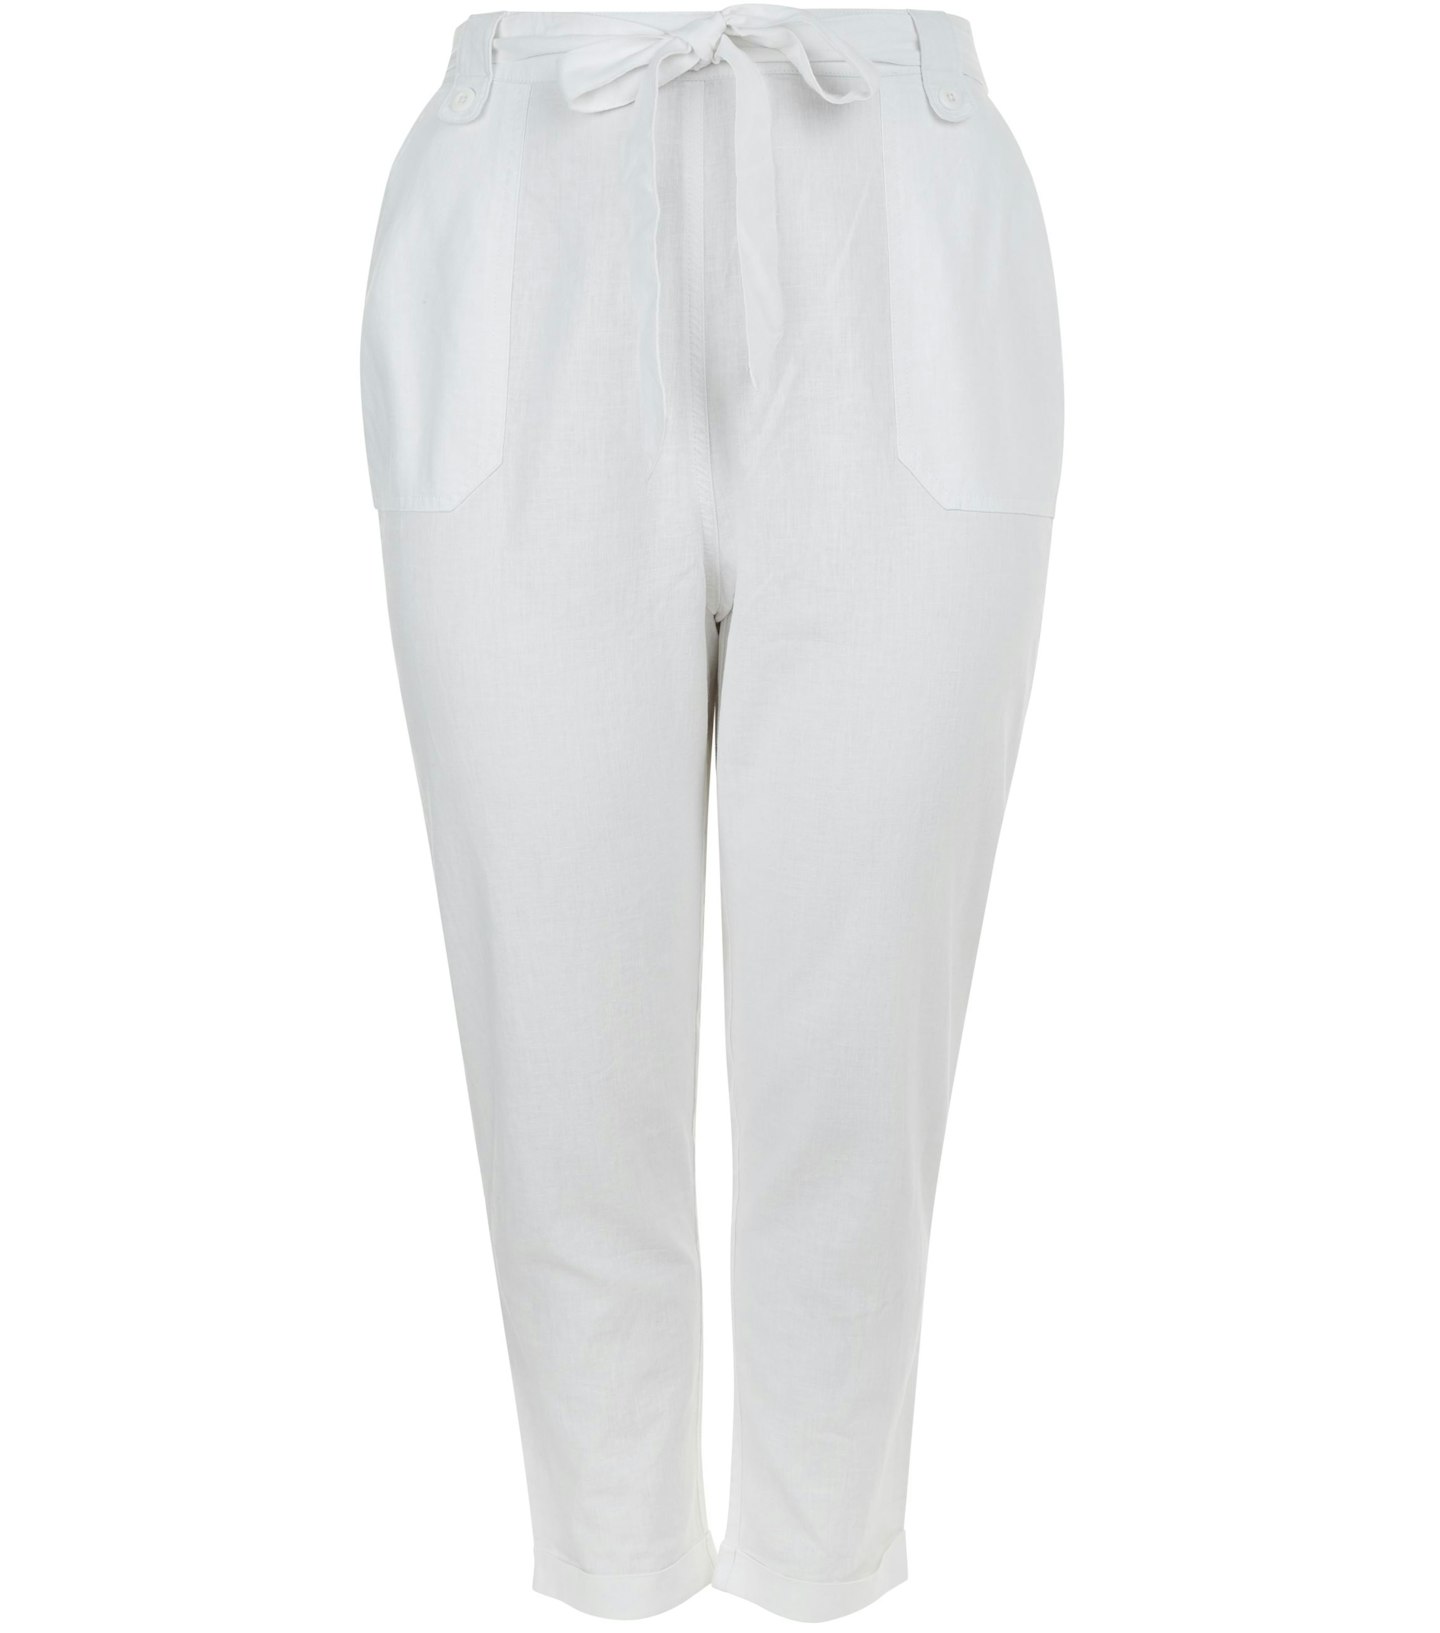 White trousers 19.99